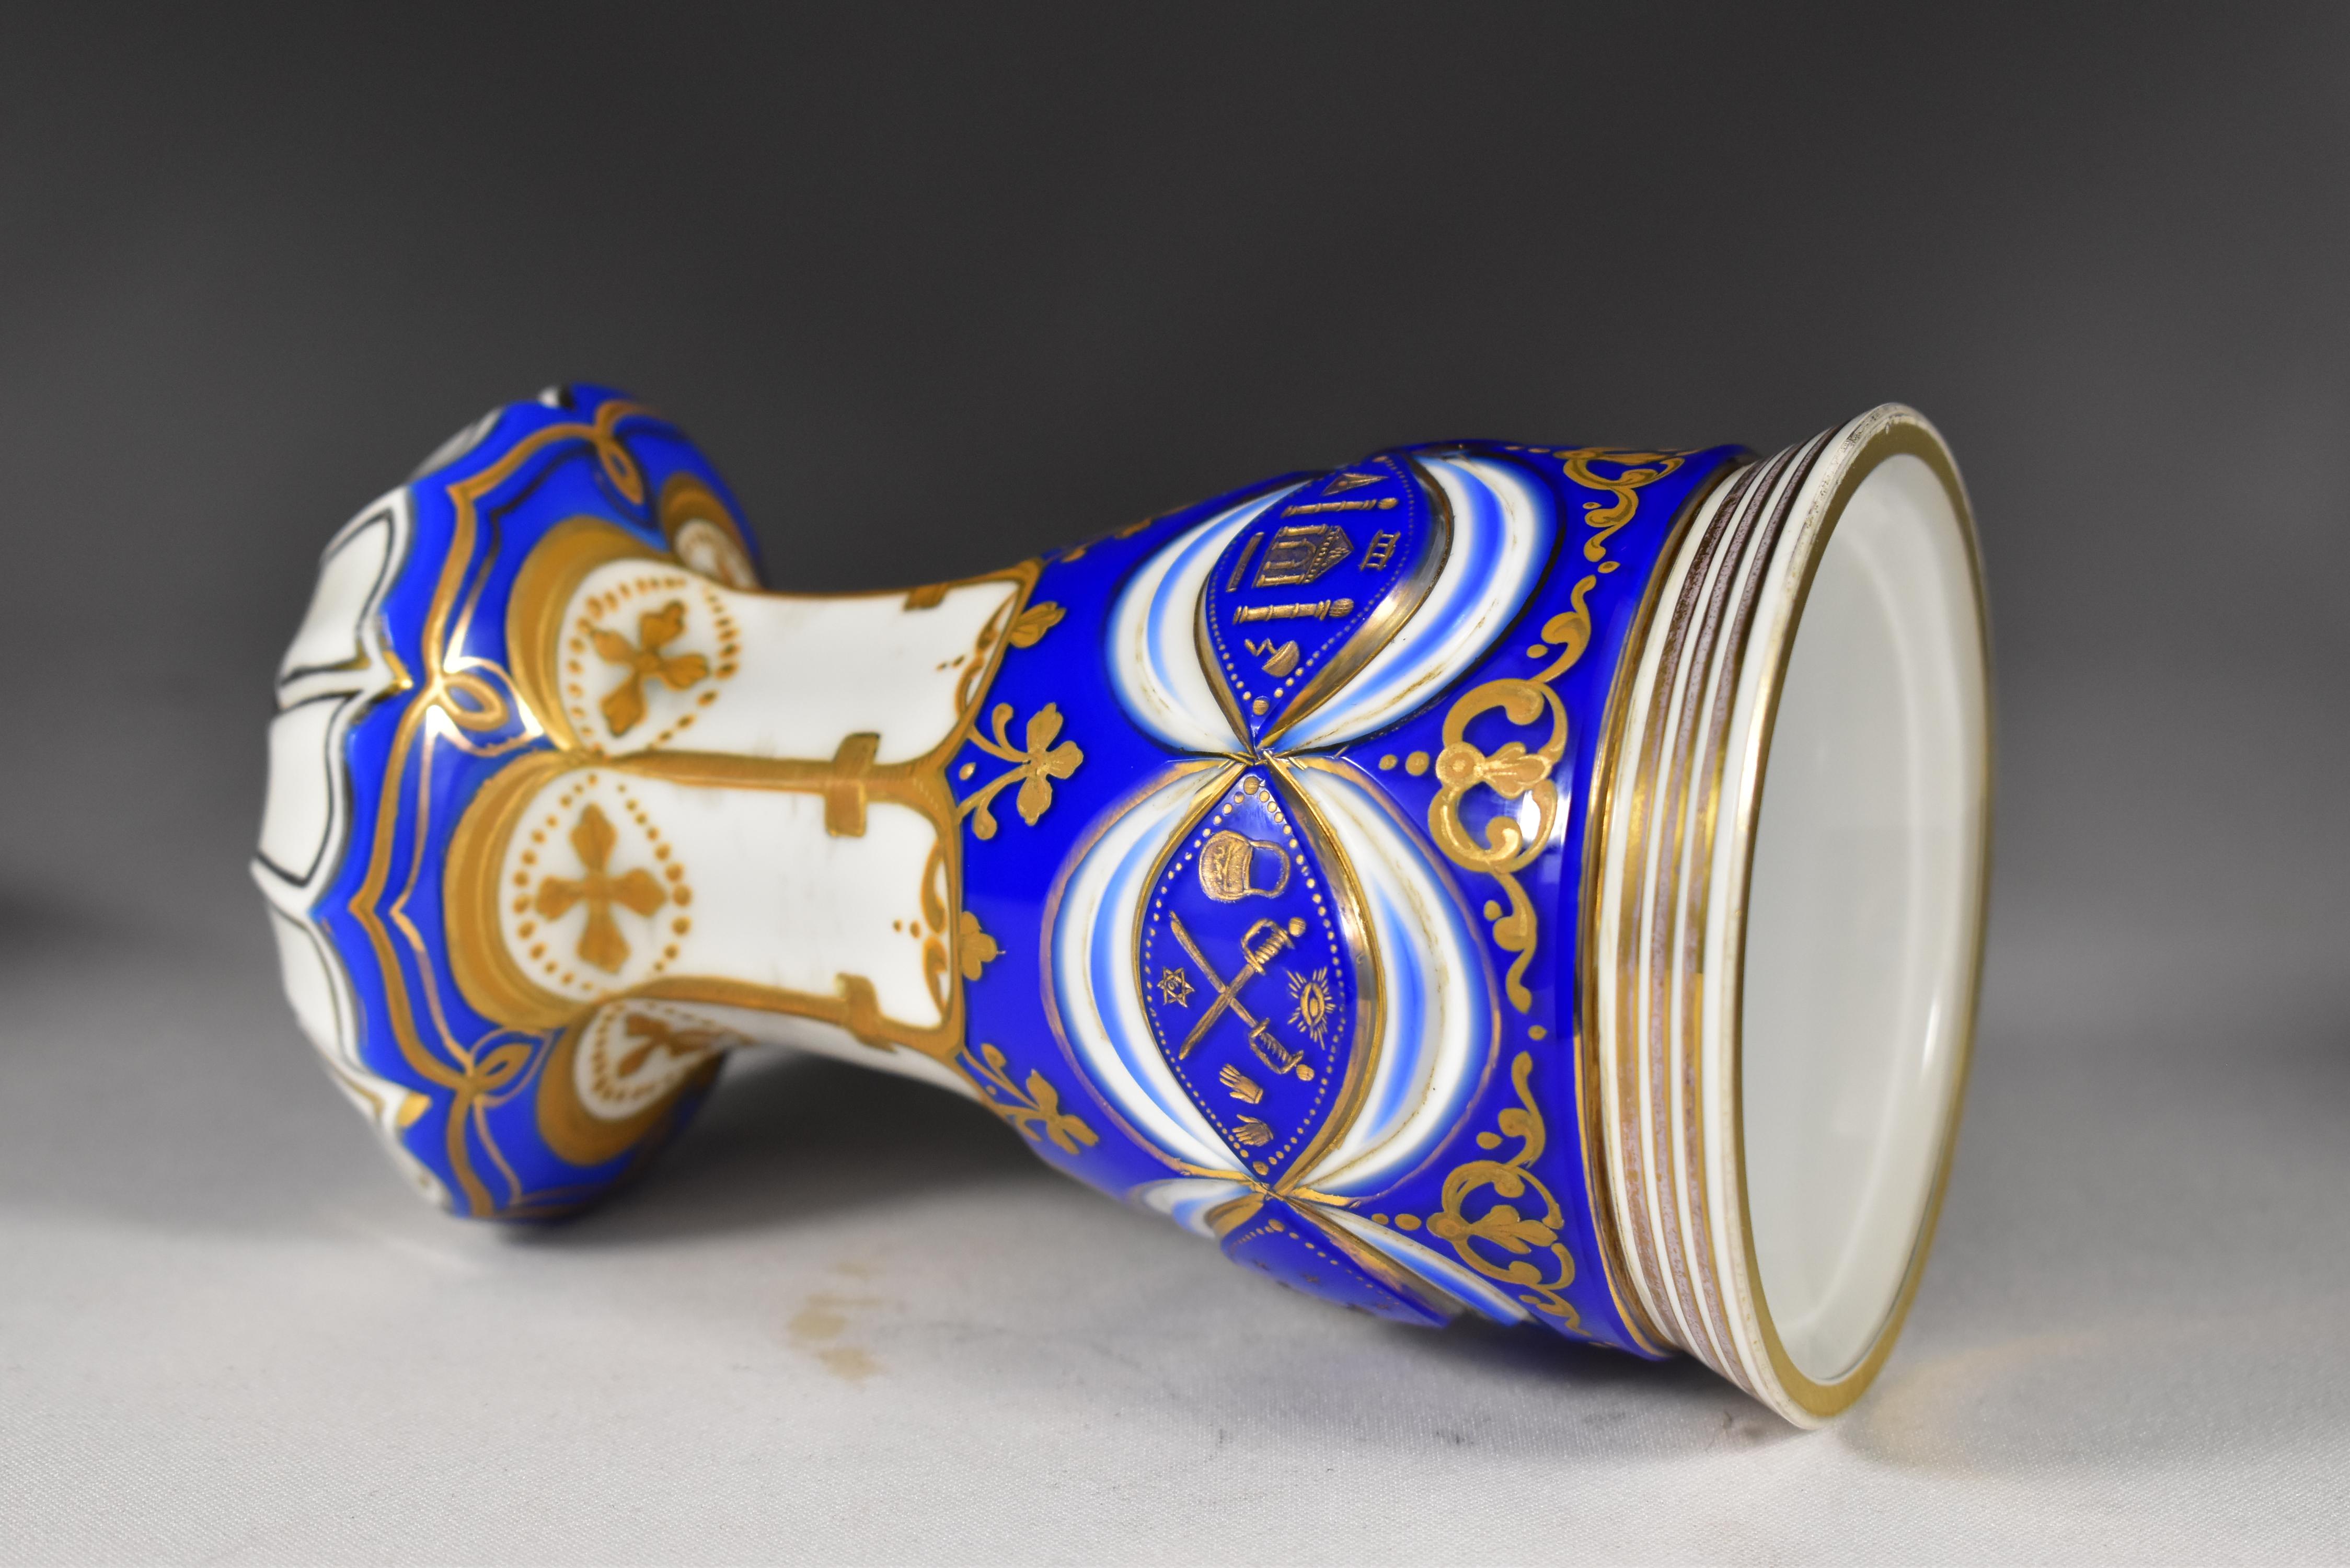 Masonic Overlay Goblet-opál and Cobalt Glass Engraved, Cut and Paint 19th Century 11